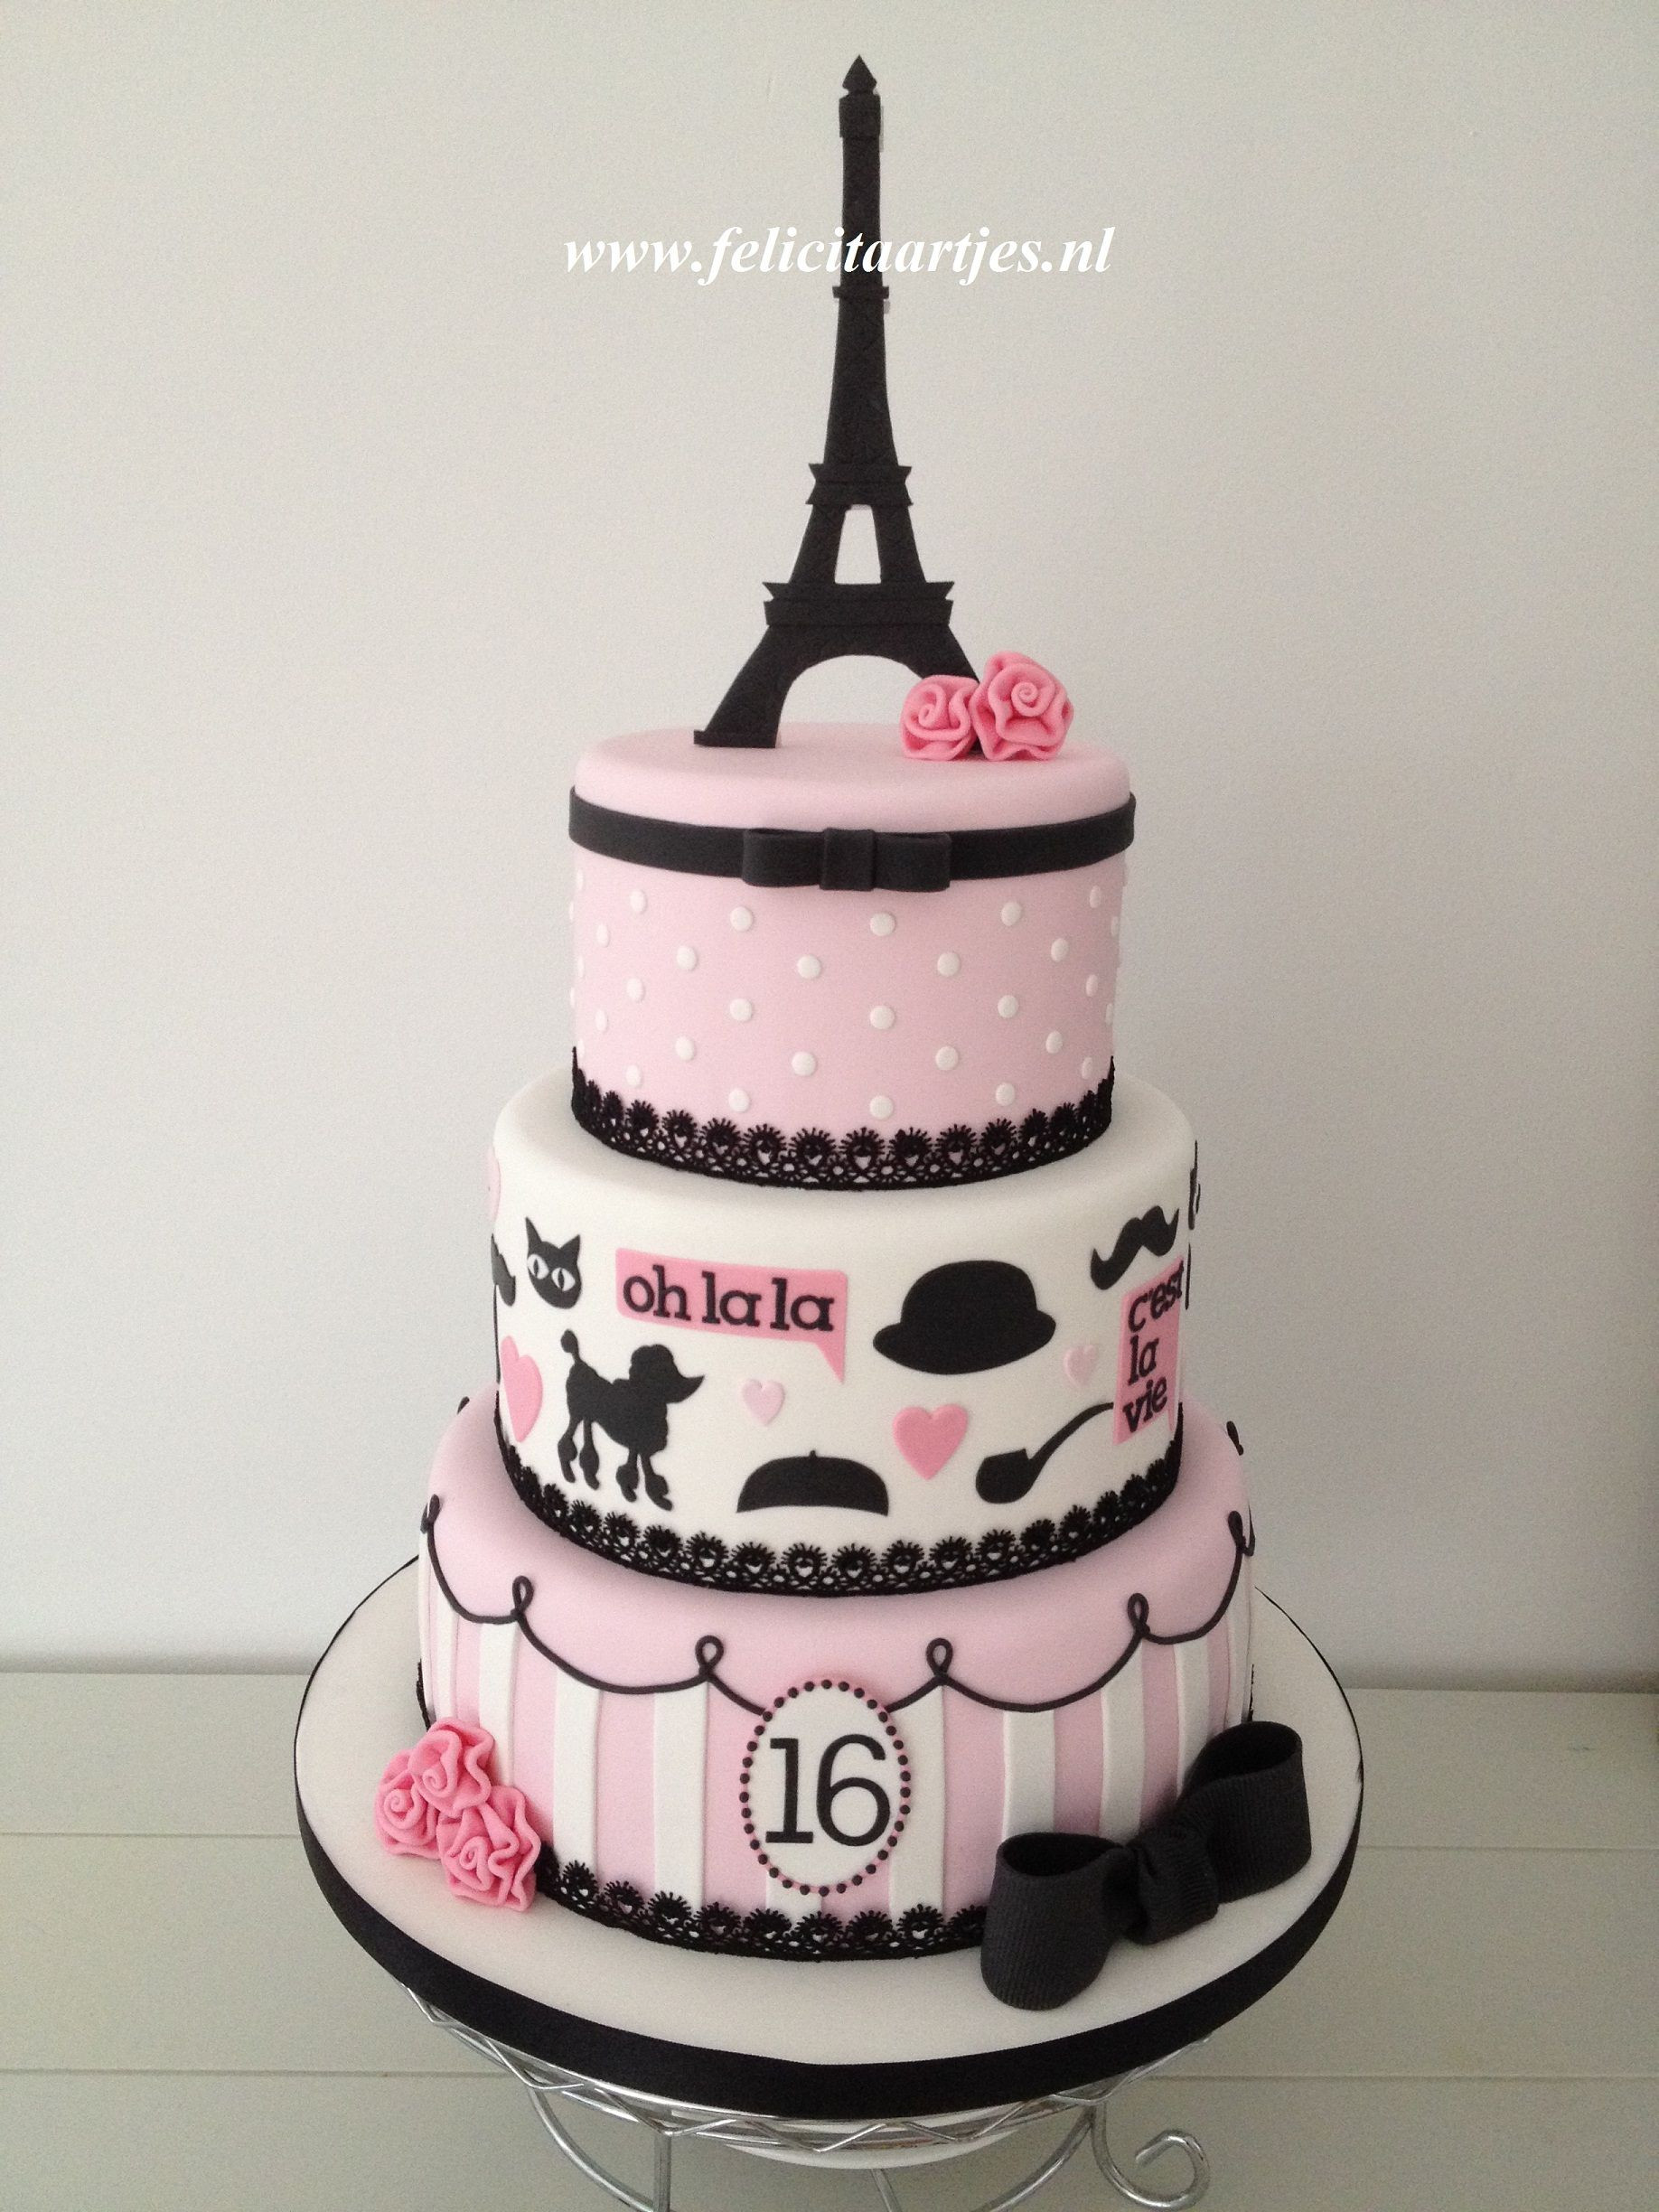 Daughter For Dessert Ch 9
 Pink Black Paris Cake Sweet 16 cake for my daughter s